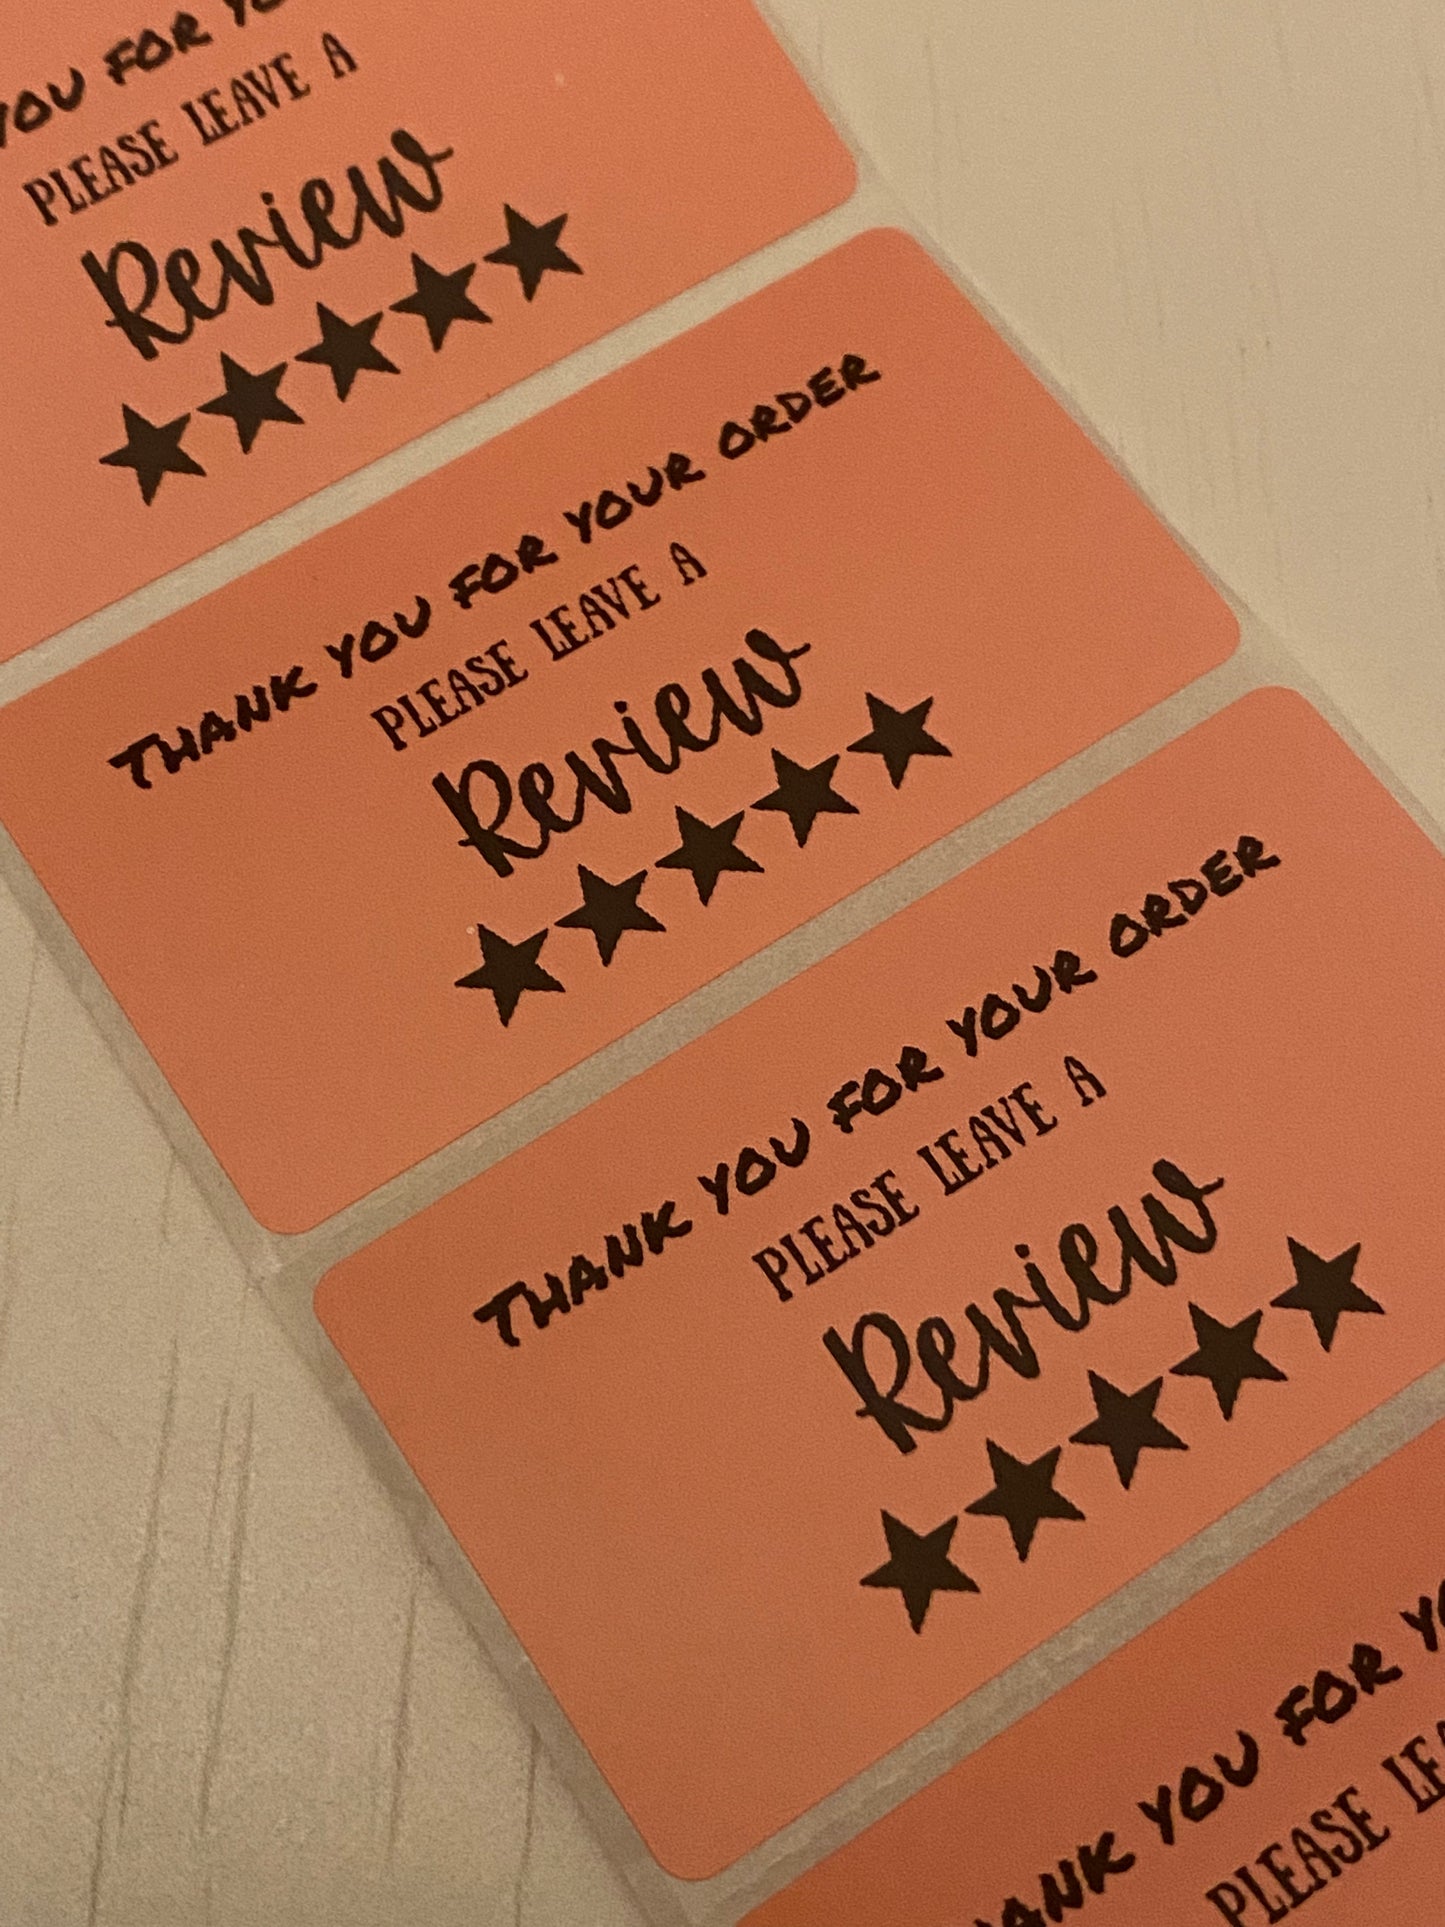 Please leave a review stickers